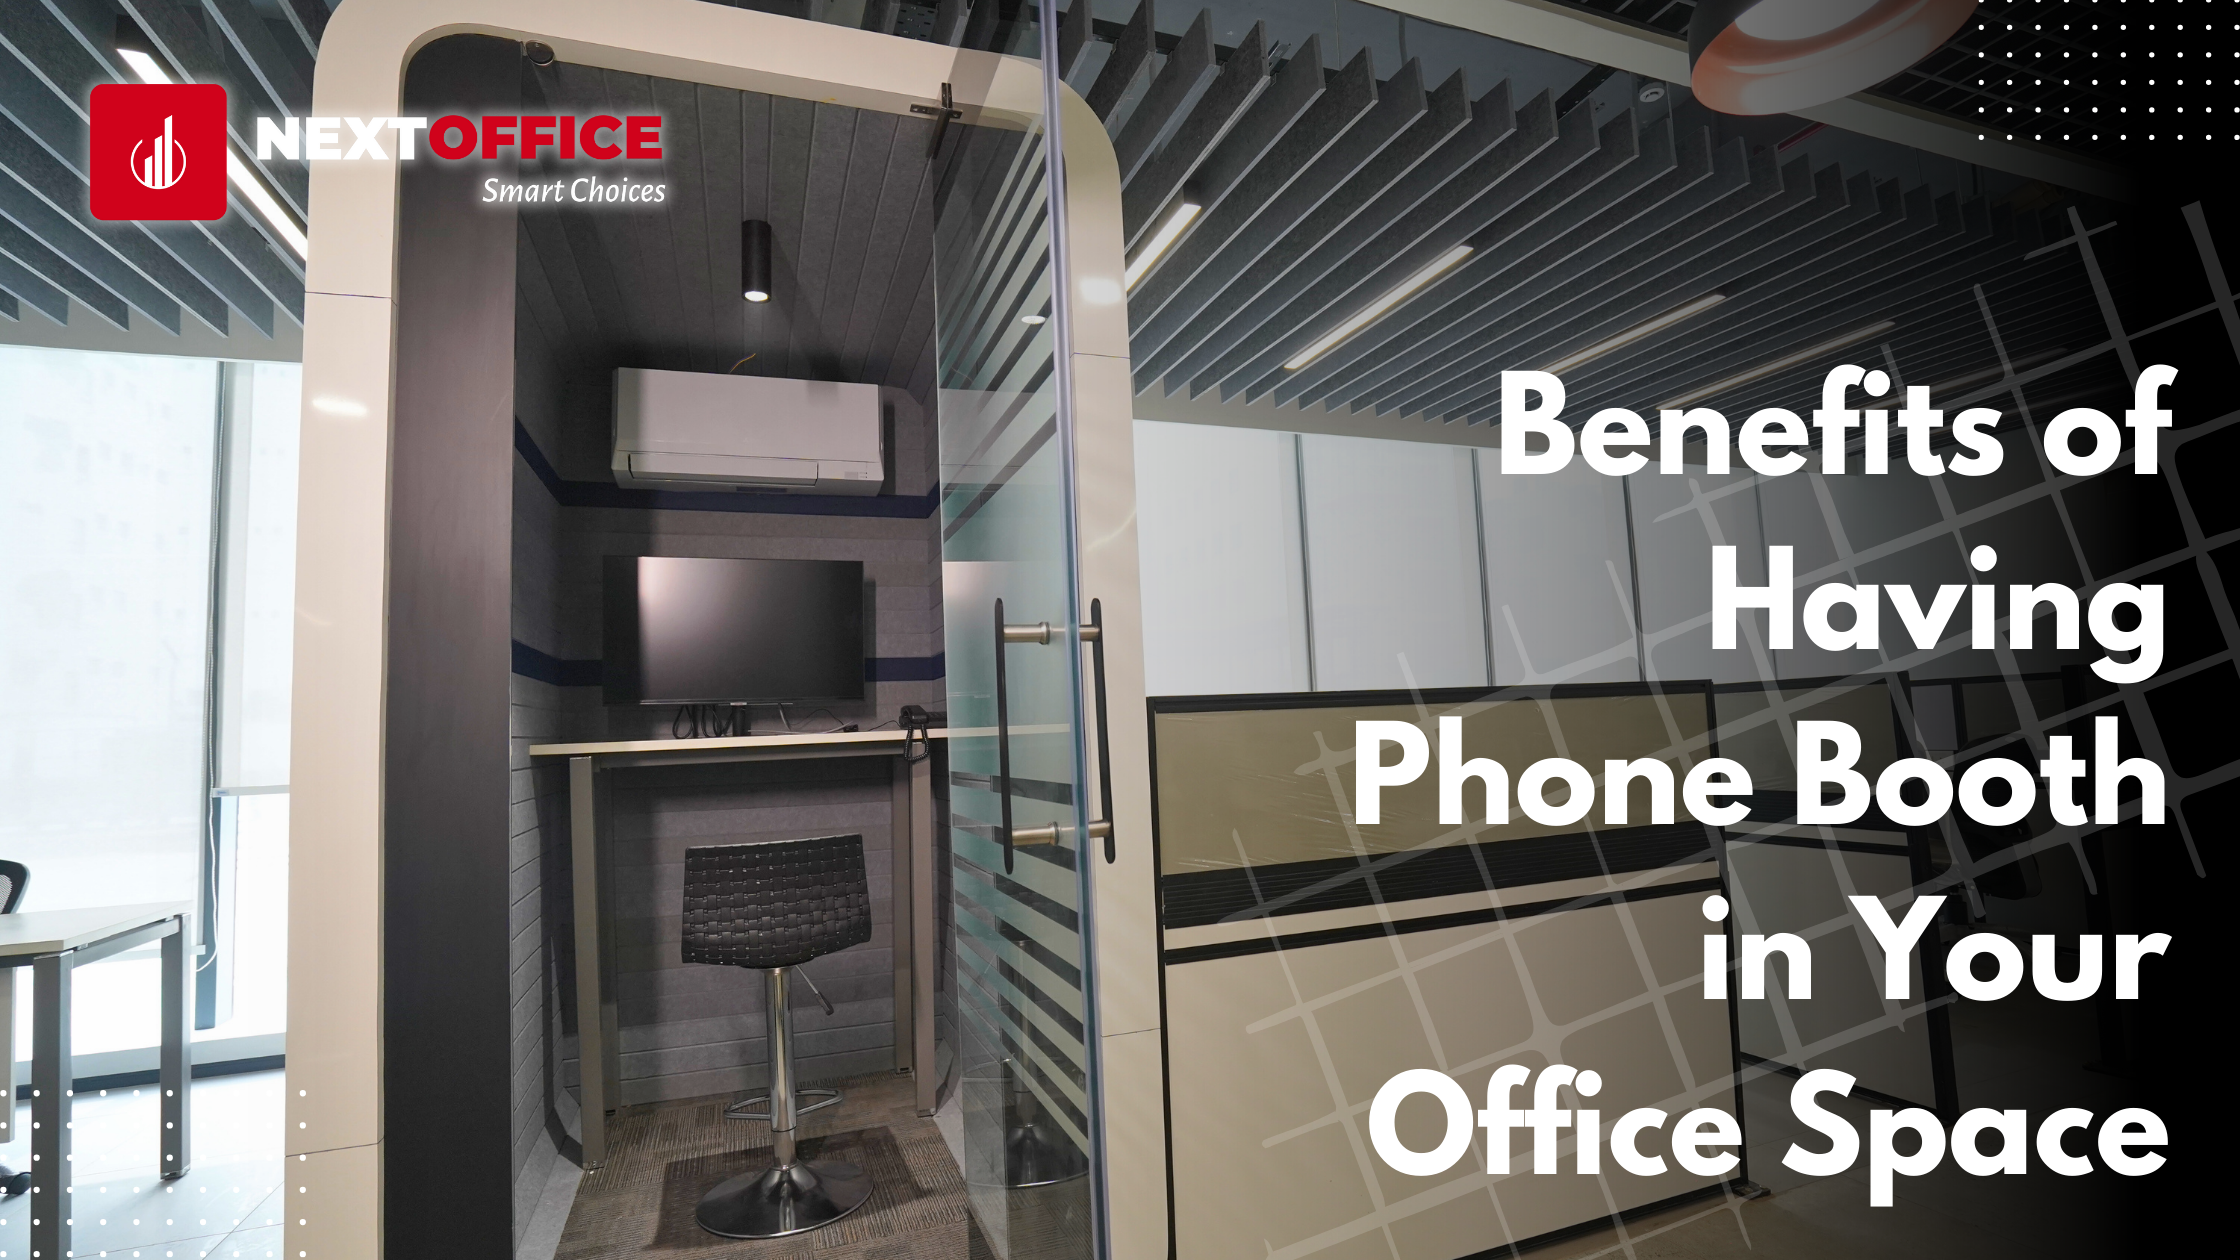 Benefits of having phone booth in your office space